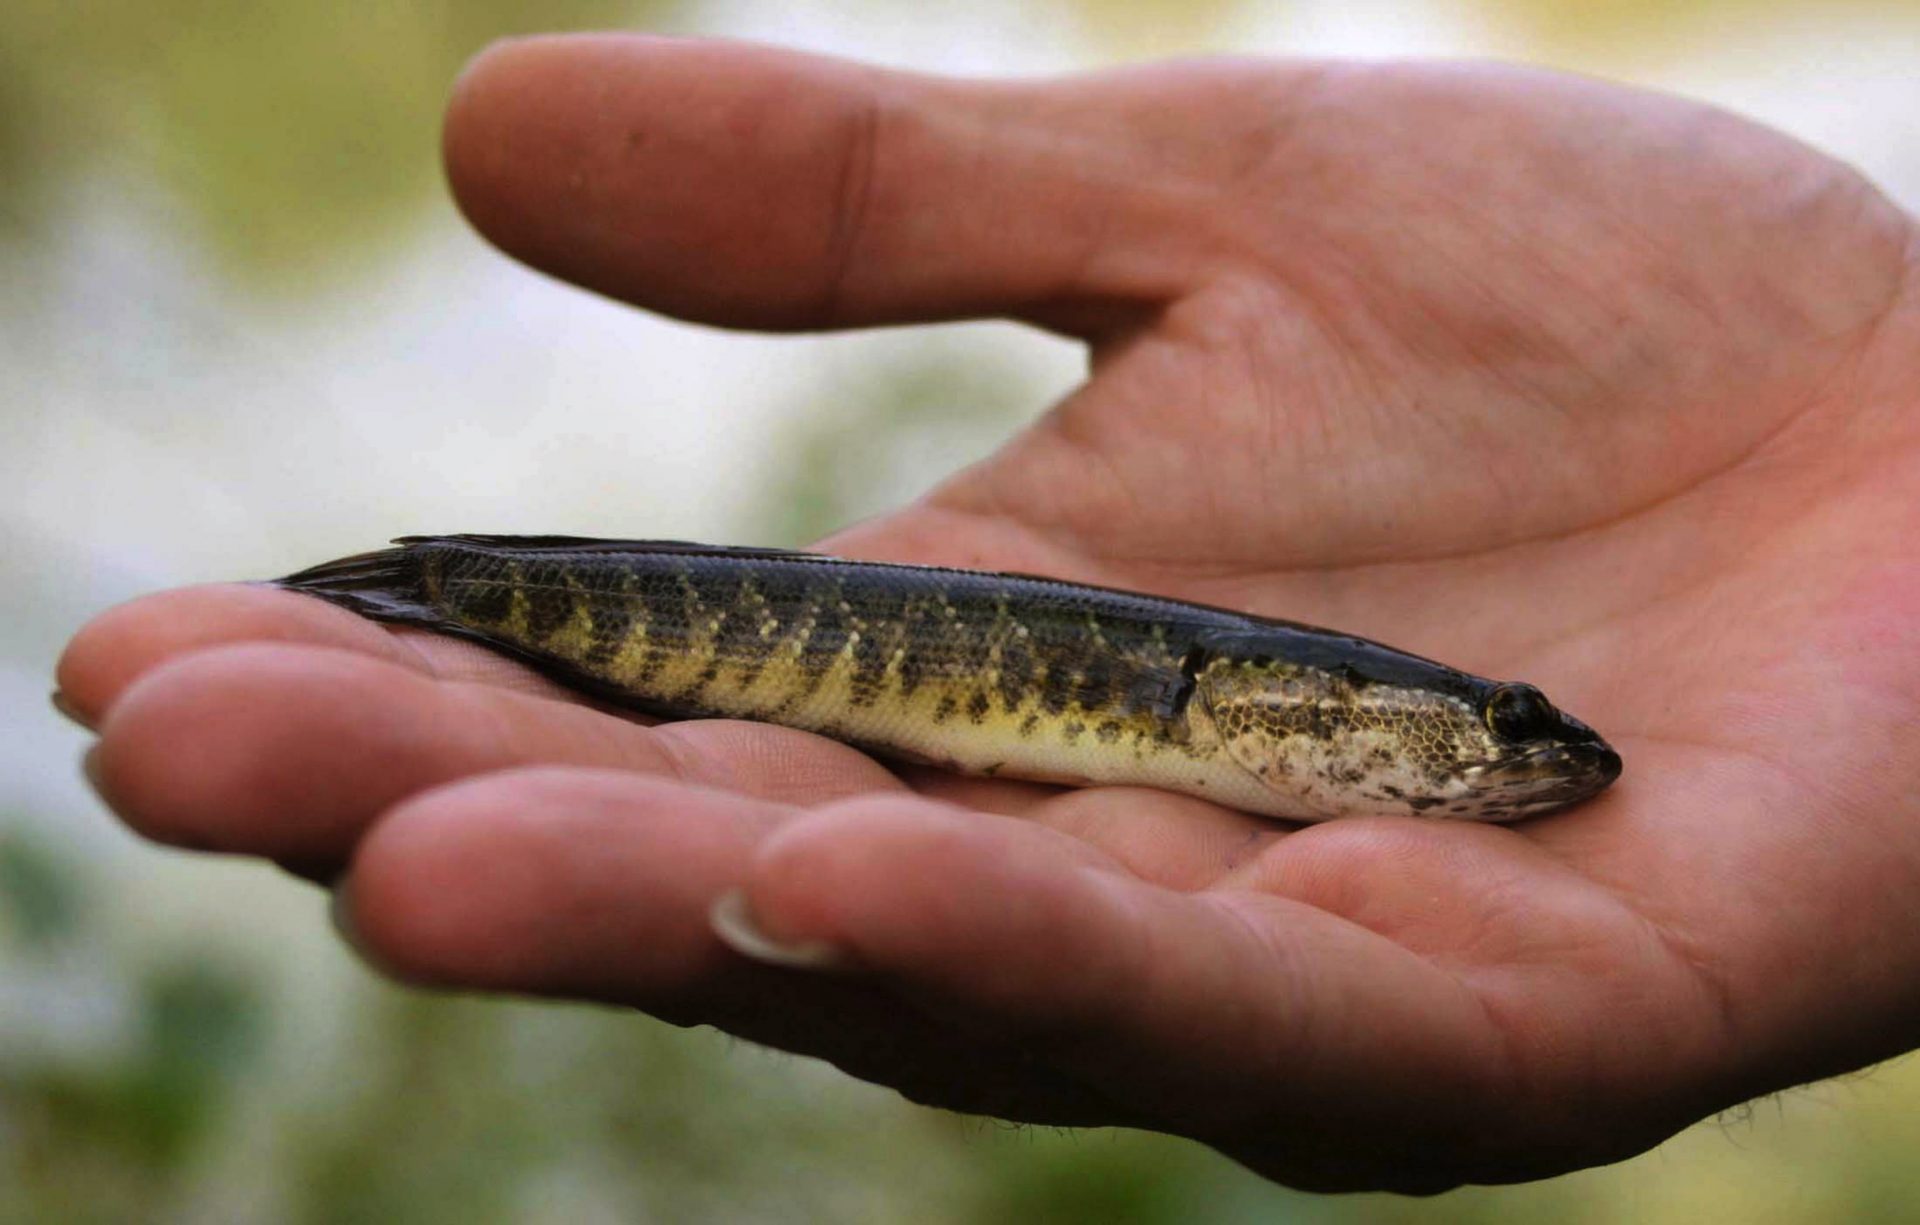 Government Lifts Decade-Old Snakehead Fish Farming Ban - The